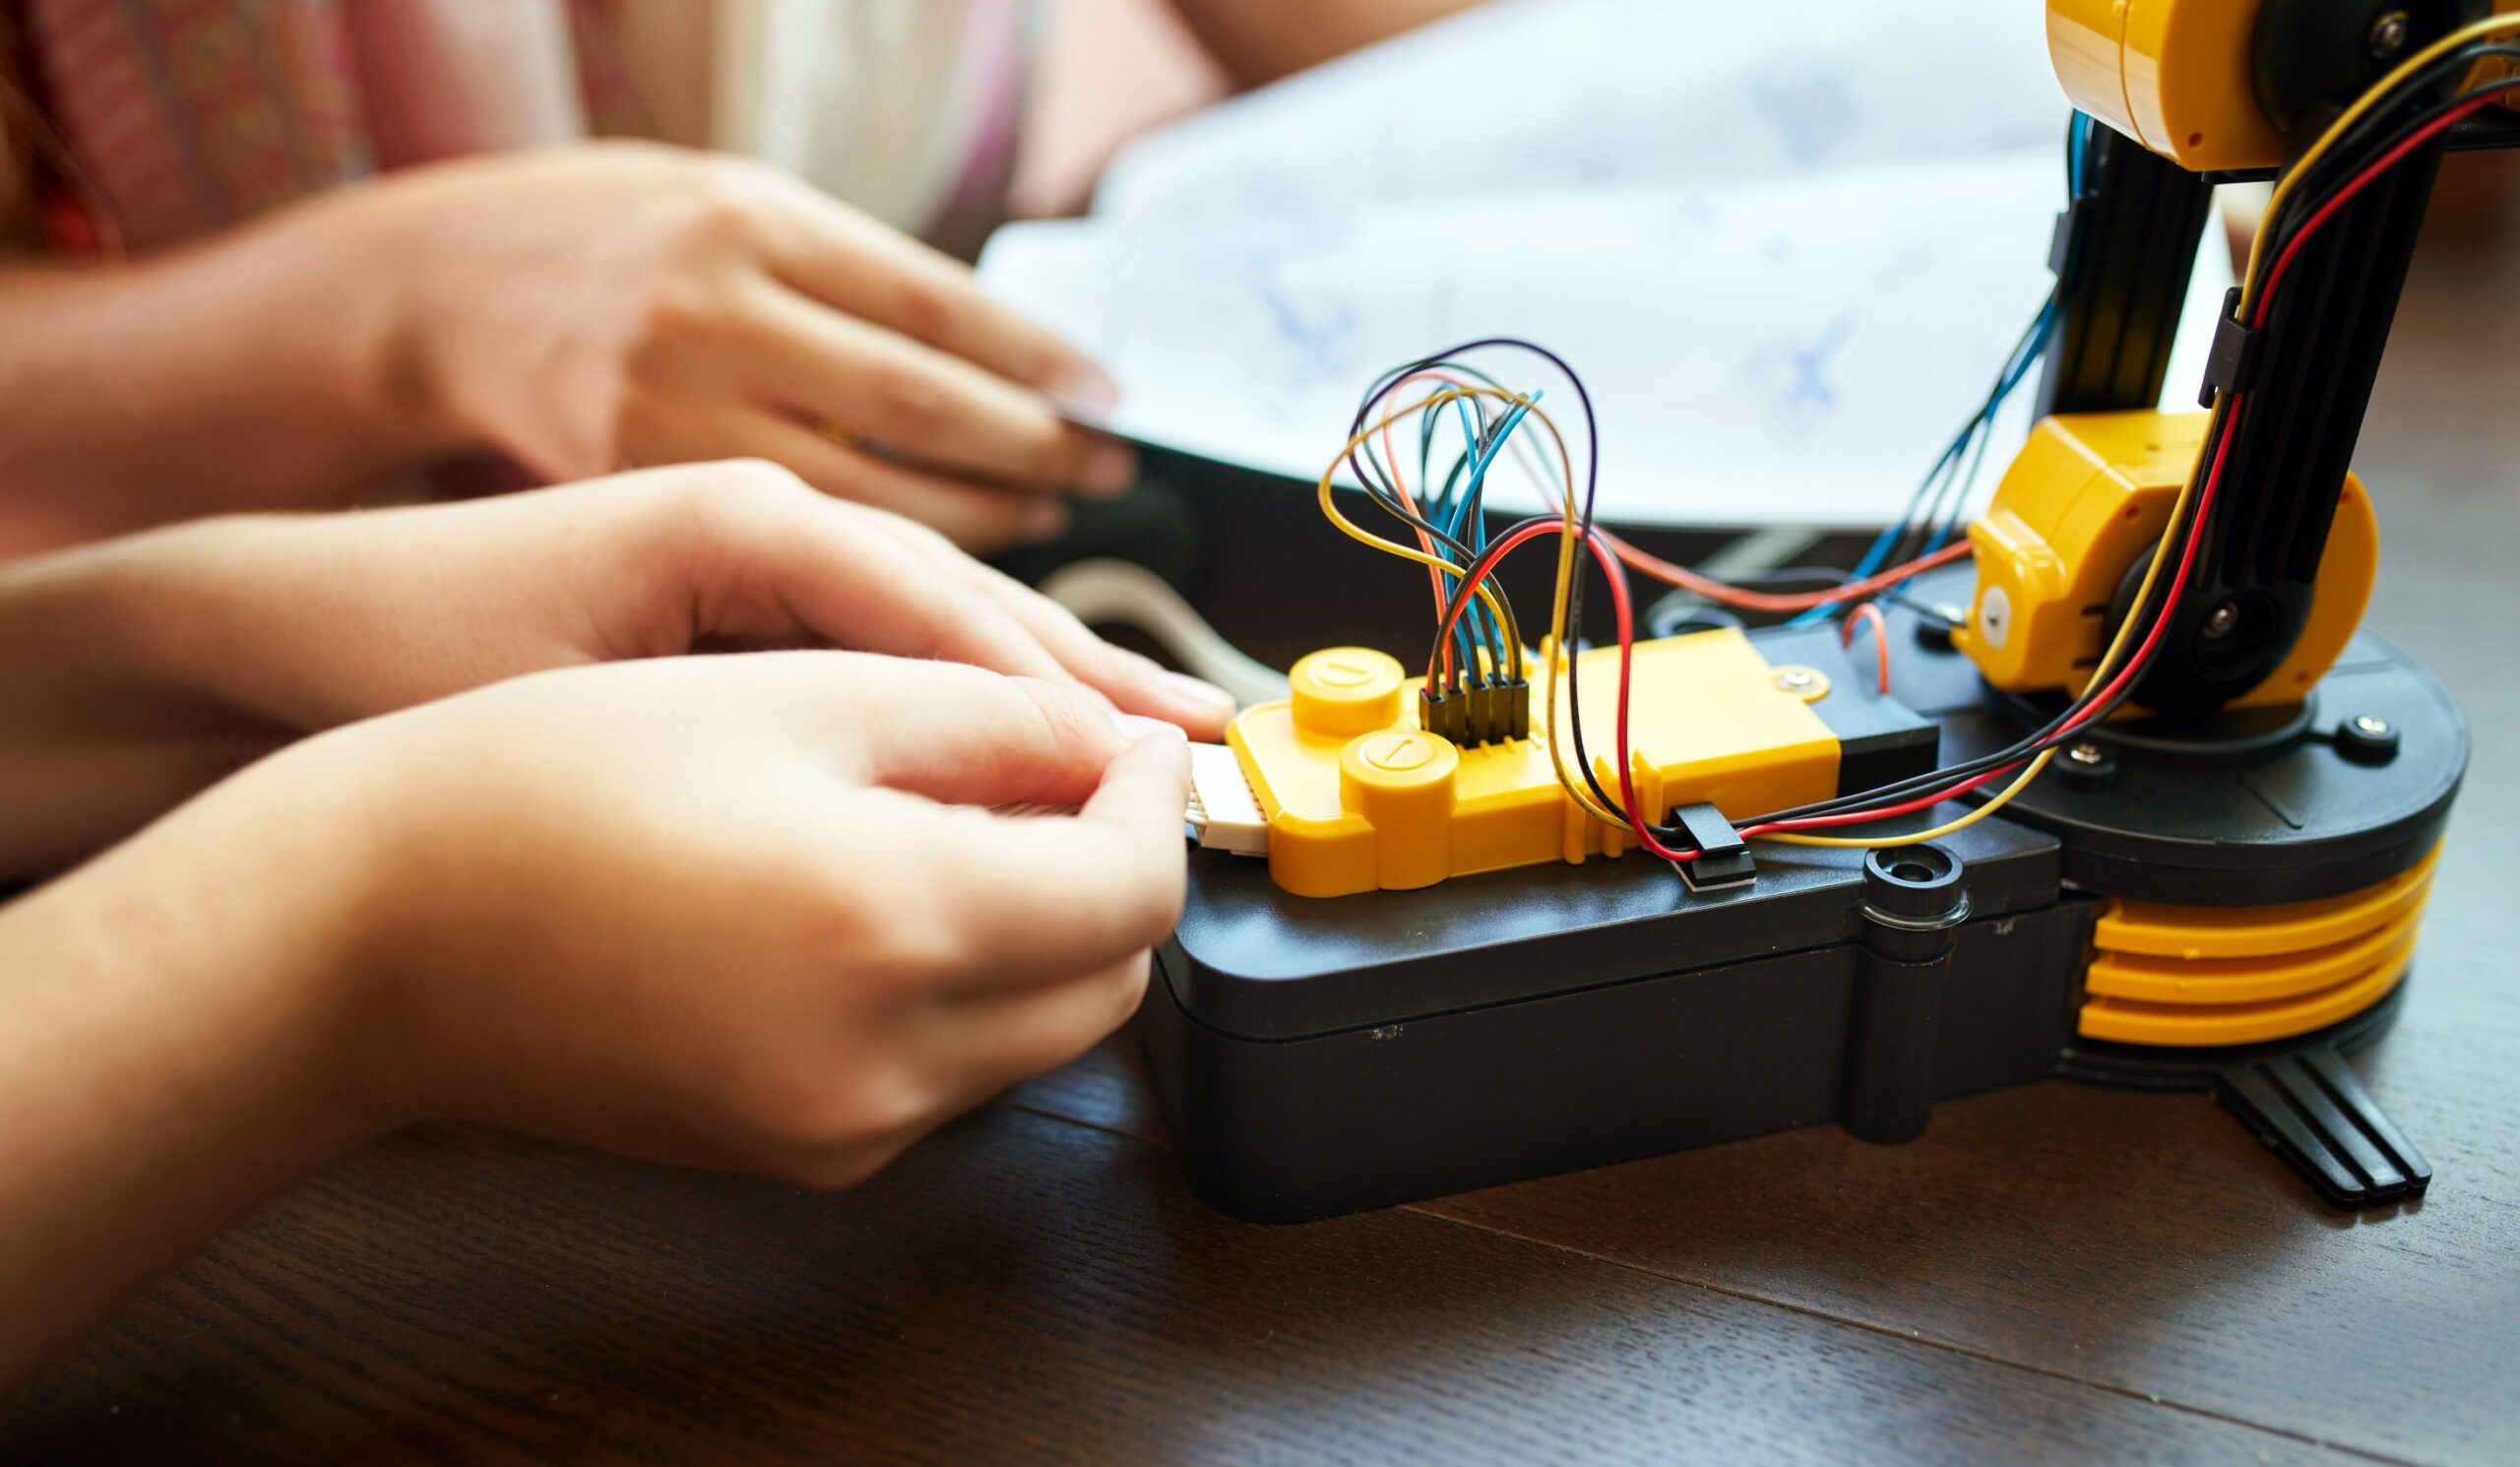 Videos and Resources for Making STEM Come Alive